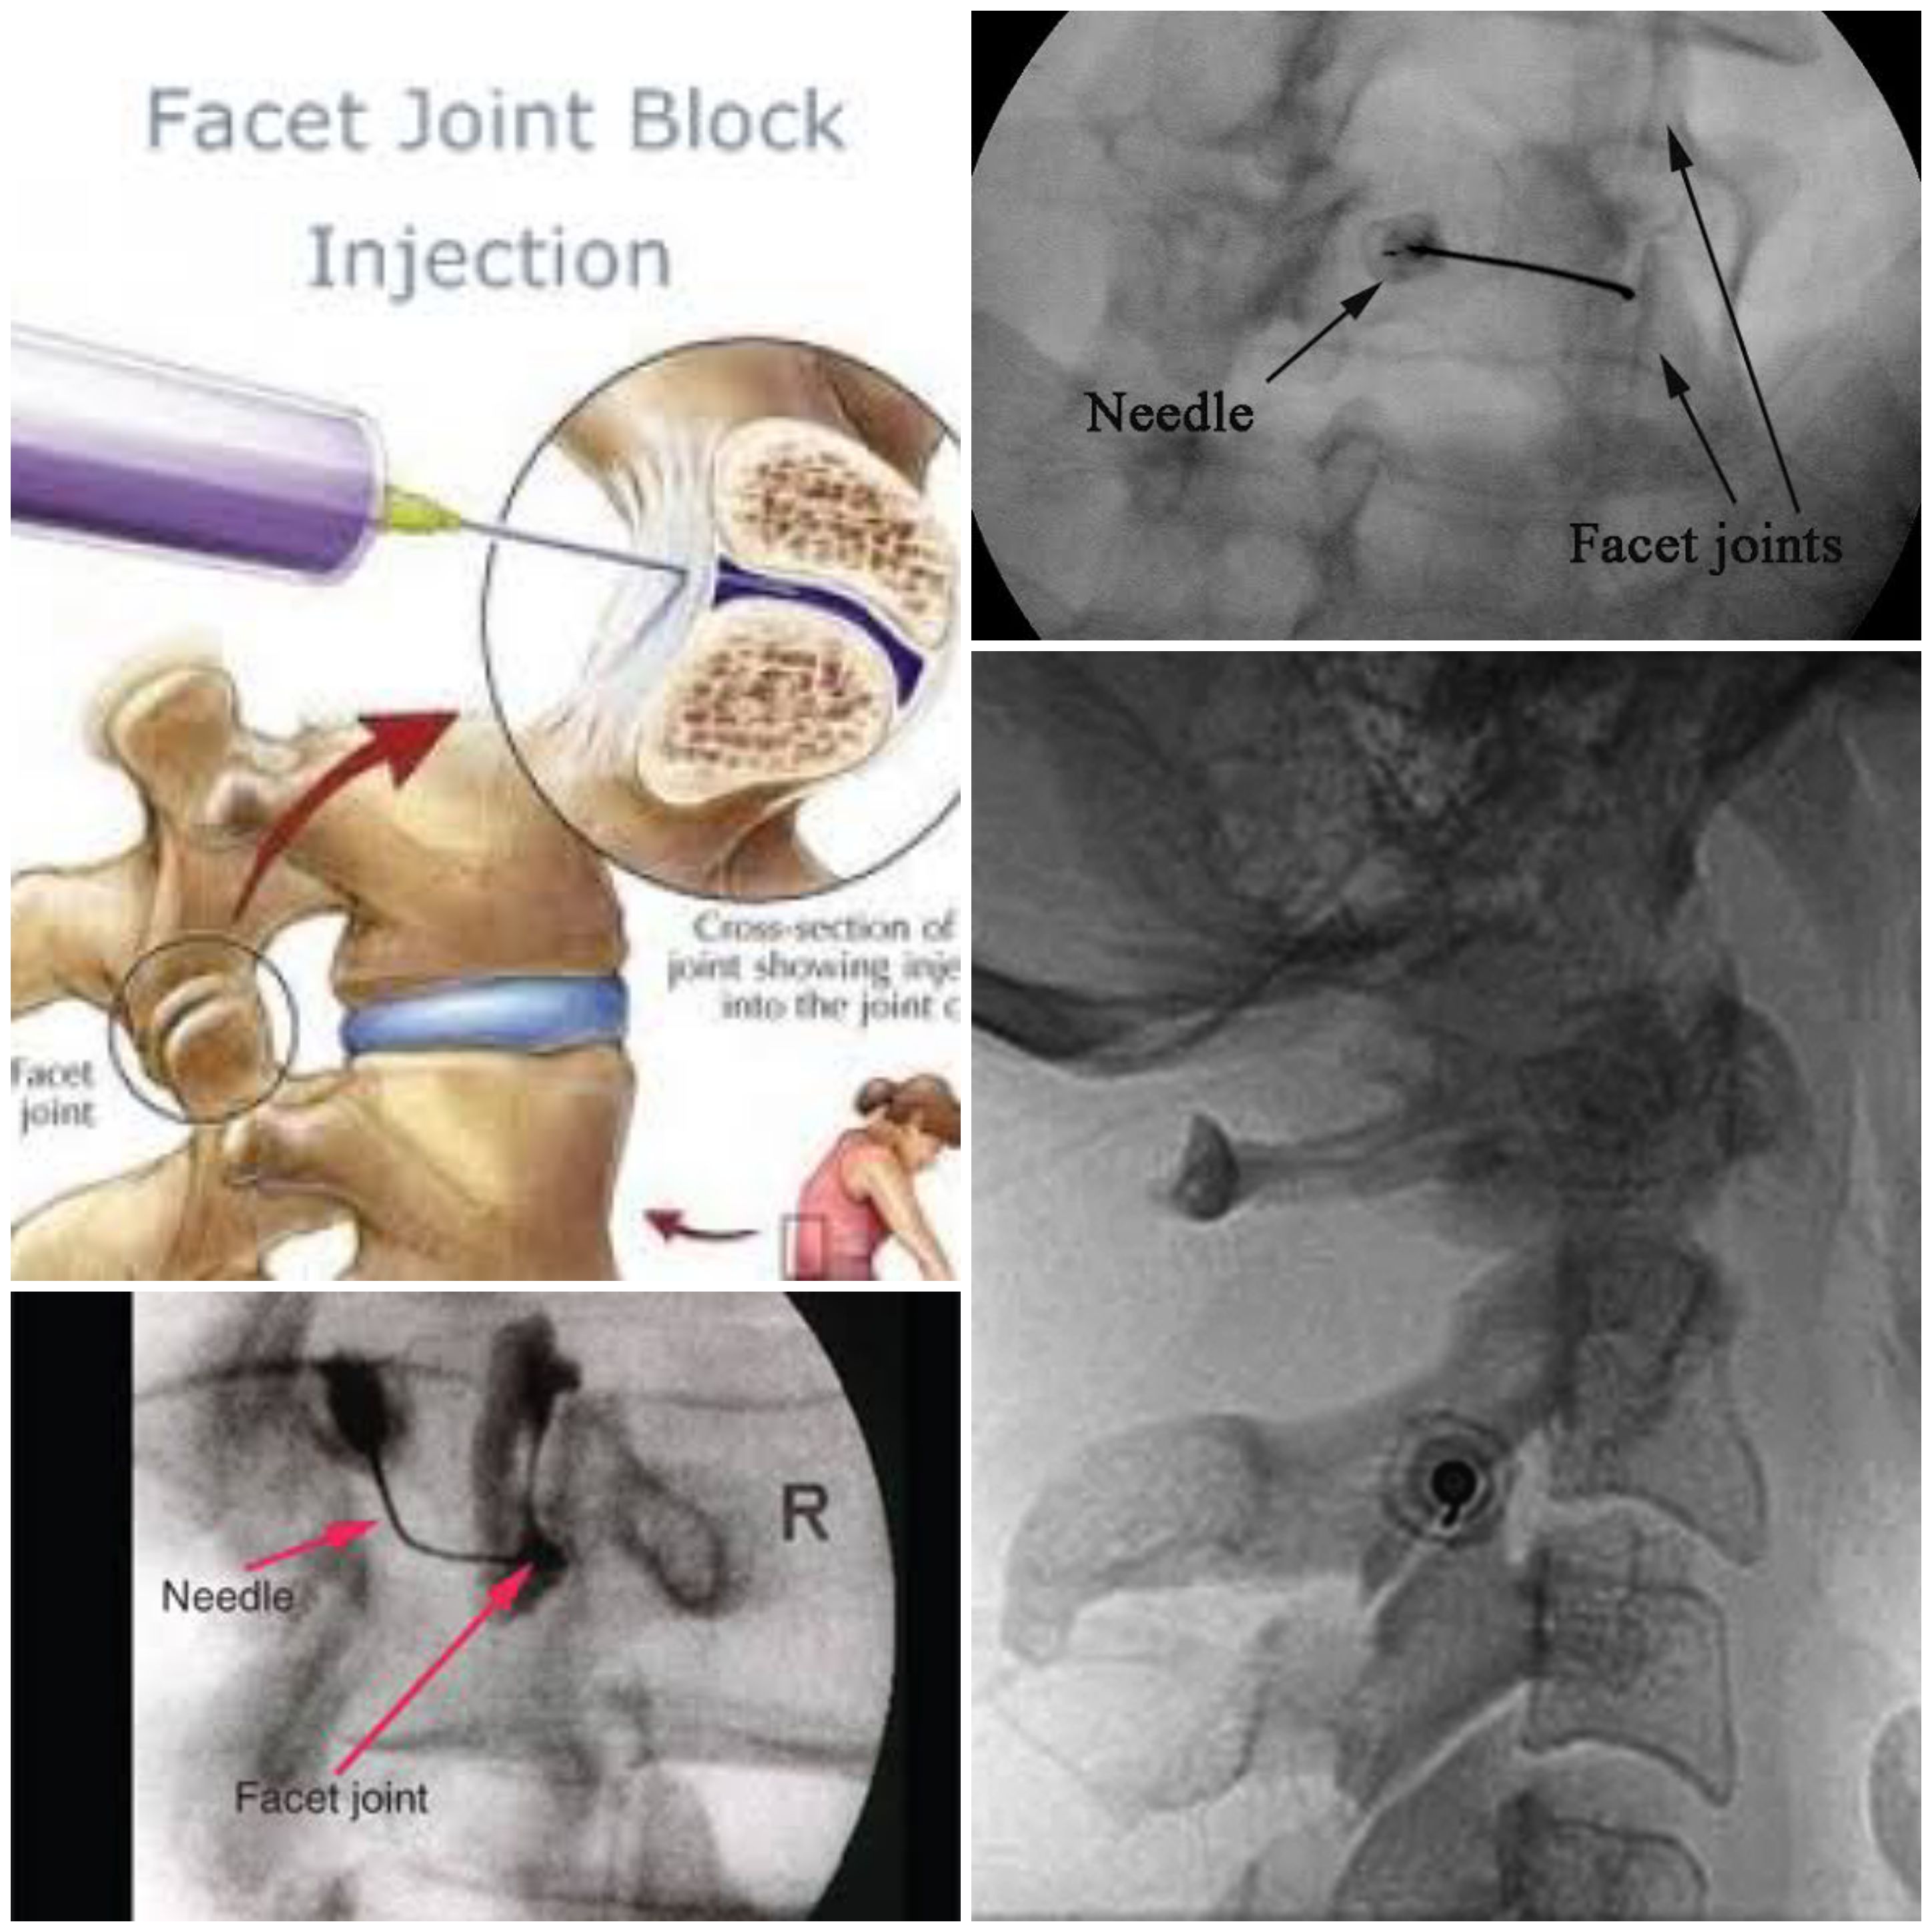 facet joint block injection.jpg